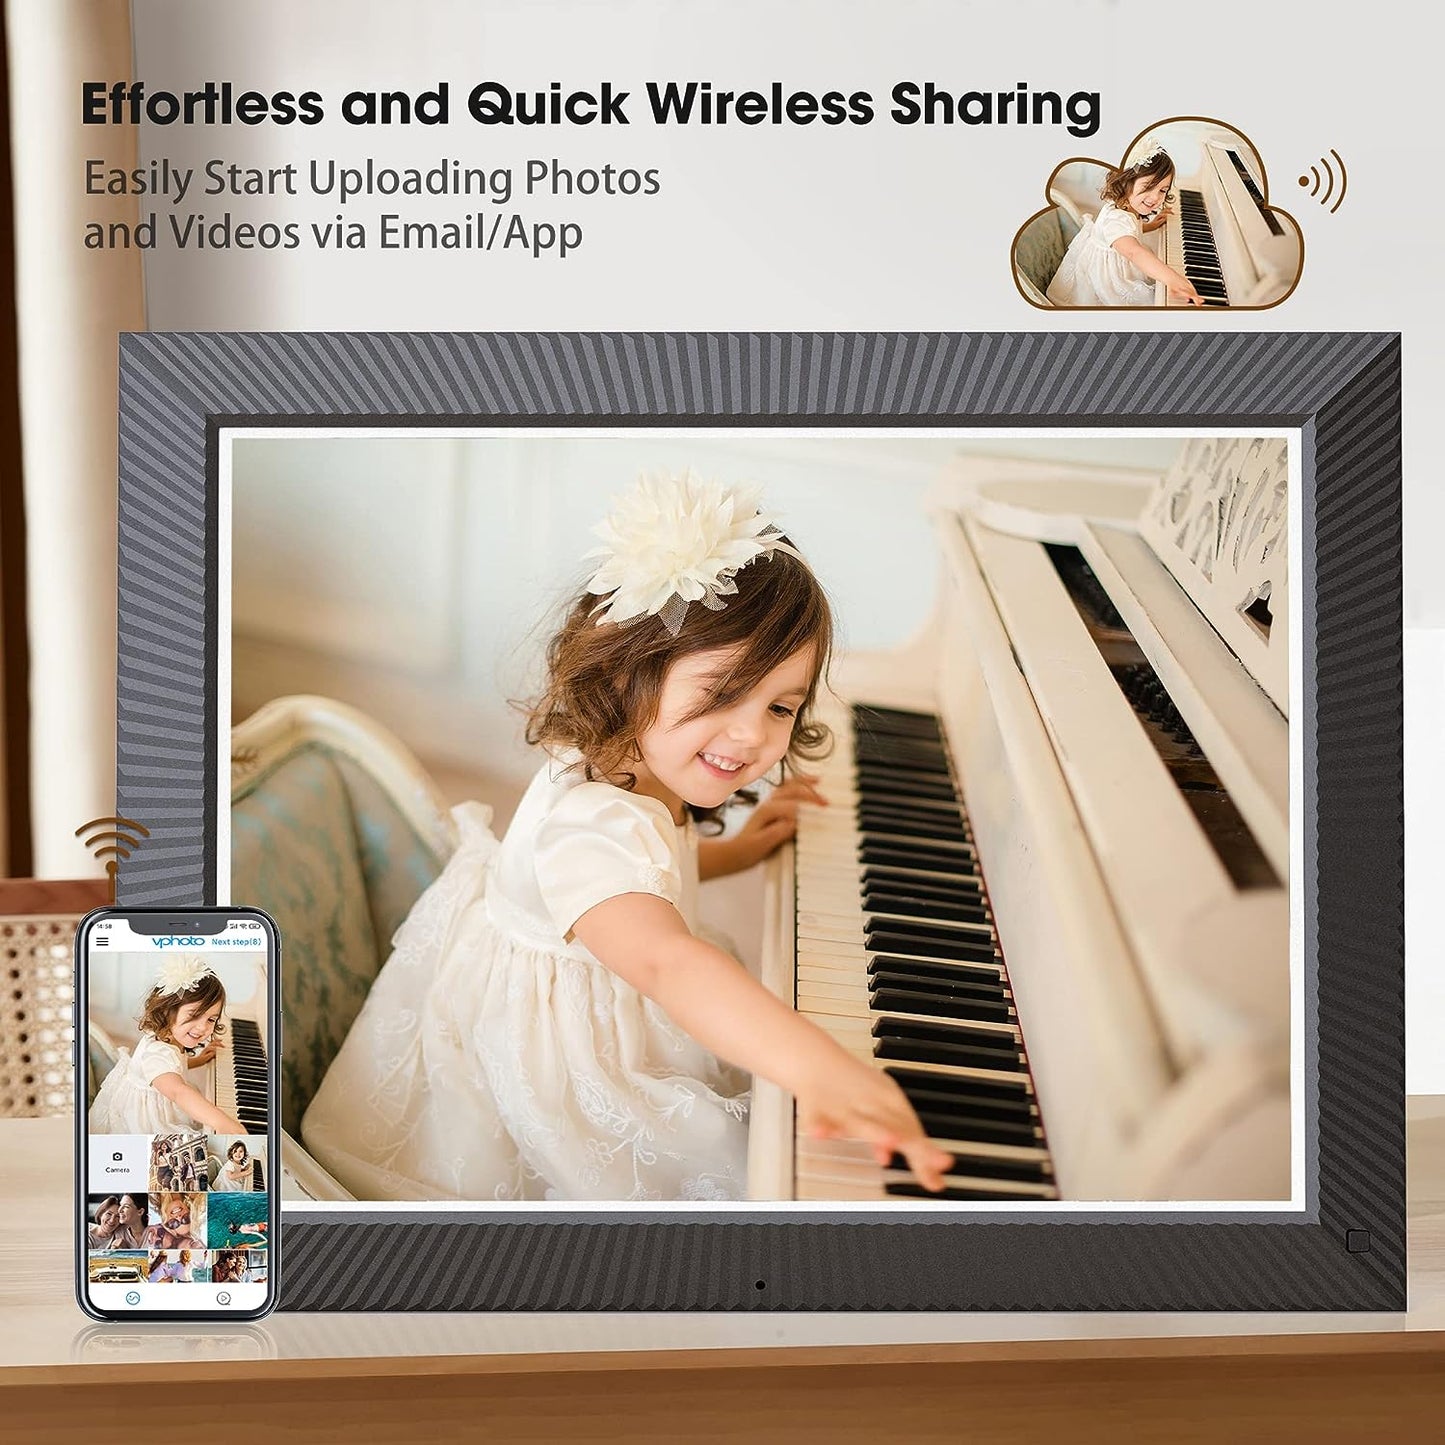 16.2-Inch Large Digital Picture Frame, Nethgrow WiFi Digital Photo Frame Touch Screen with 32GB Storage, Auto-Rotate, Motion Sensor, Share Photos and Videos via App Email, Wall Mountable